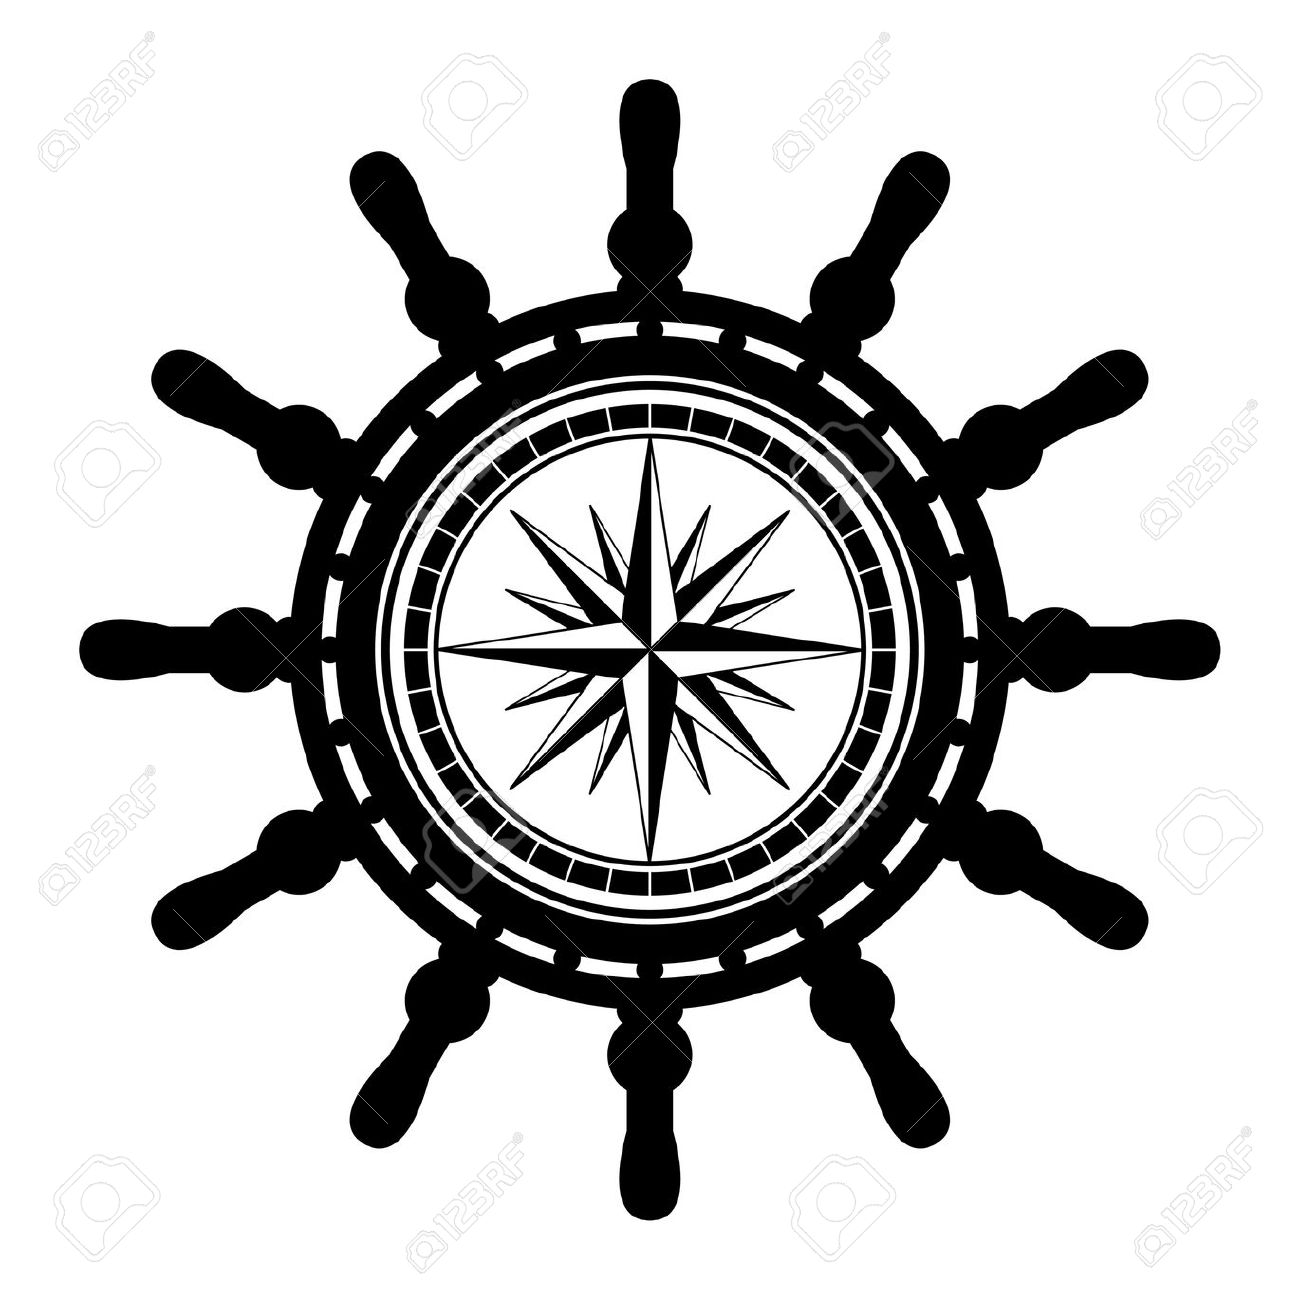 Wheel clipart time wheel. Ship free download best